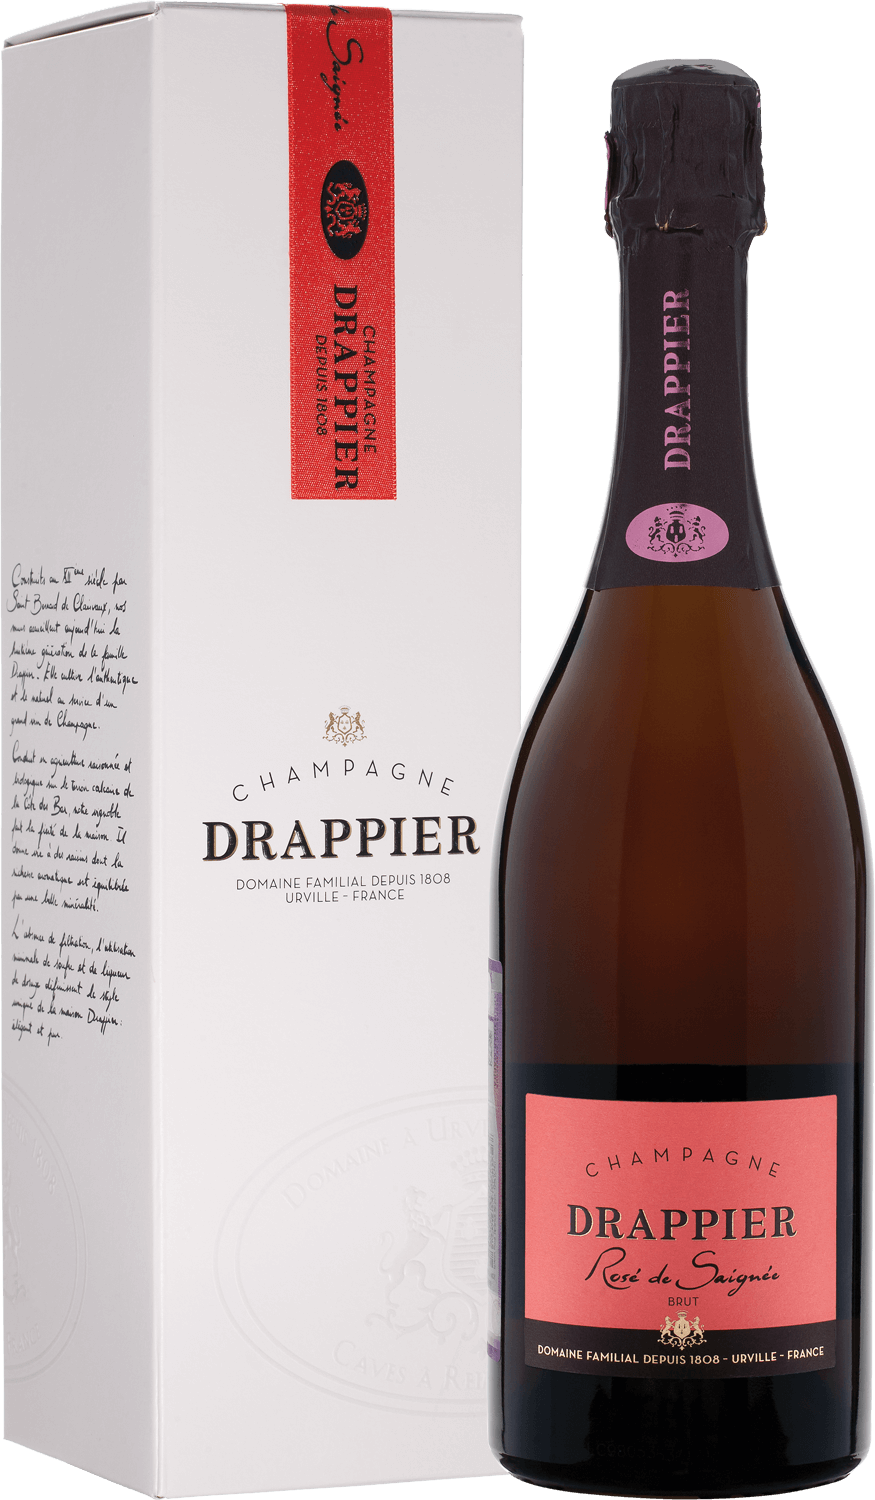 Drappier Brut Rose Champagne AOP in gift box drappier brut nature zero dosage champagne aop gift box